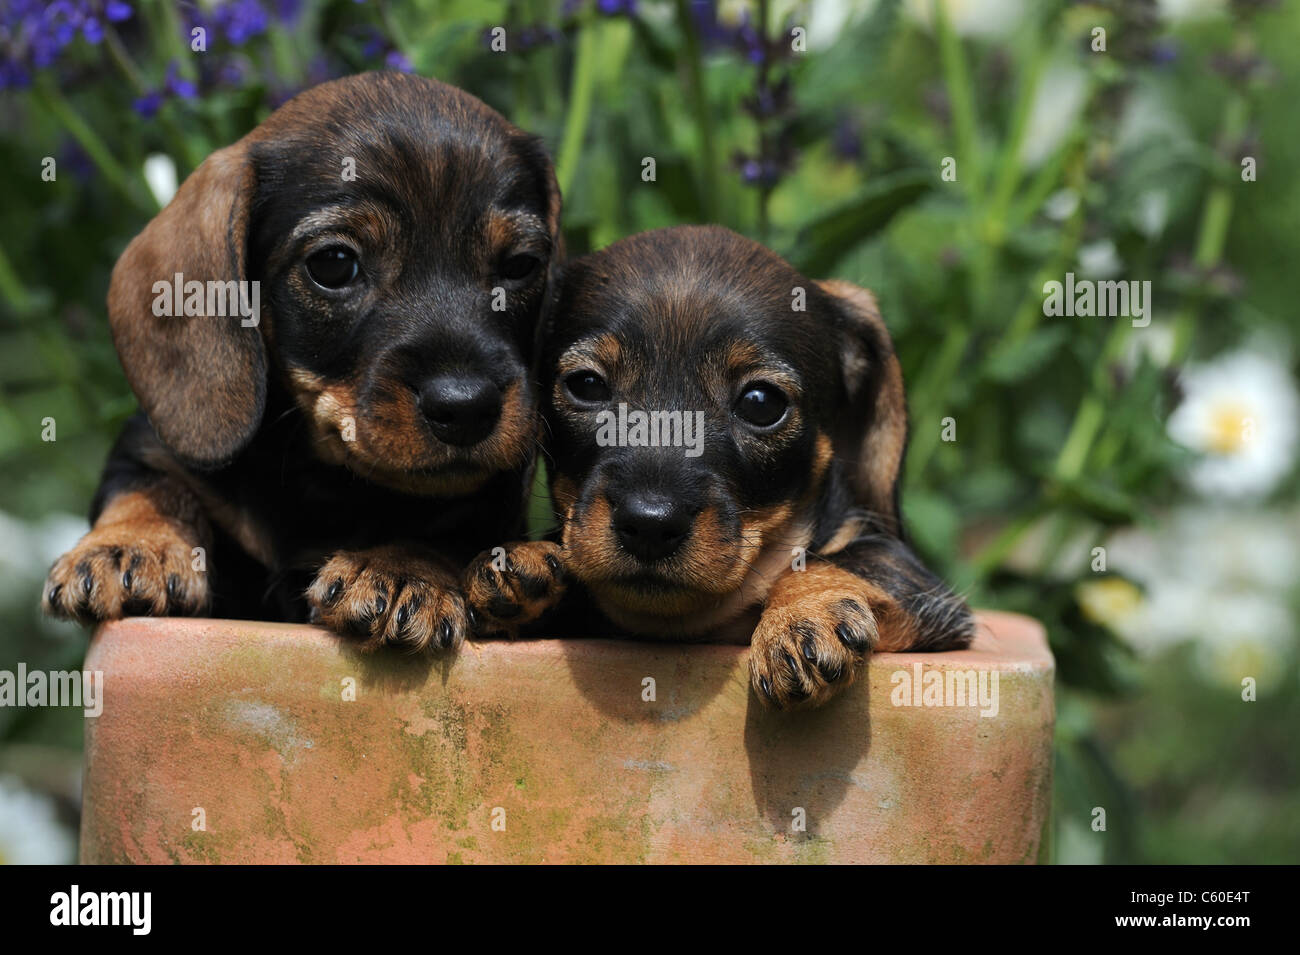 Wire-haired Dachshund (Canis lupus familiaris). Two puppies in a terracotta pot looking into the camera. Stock Photo